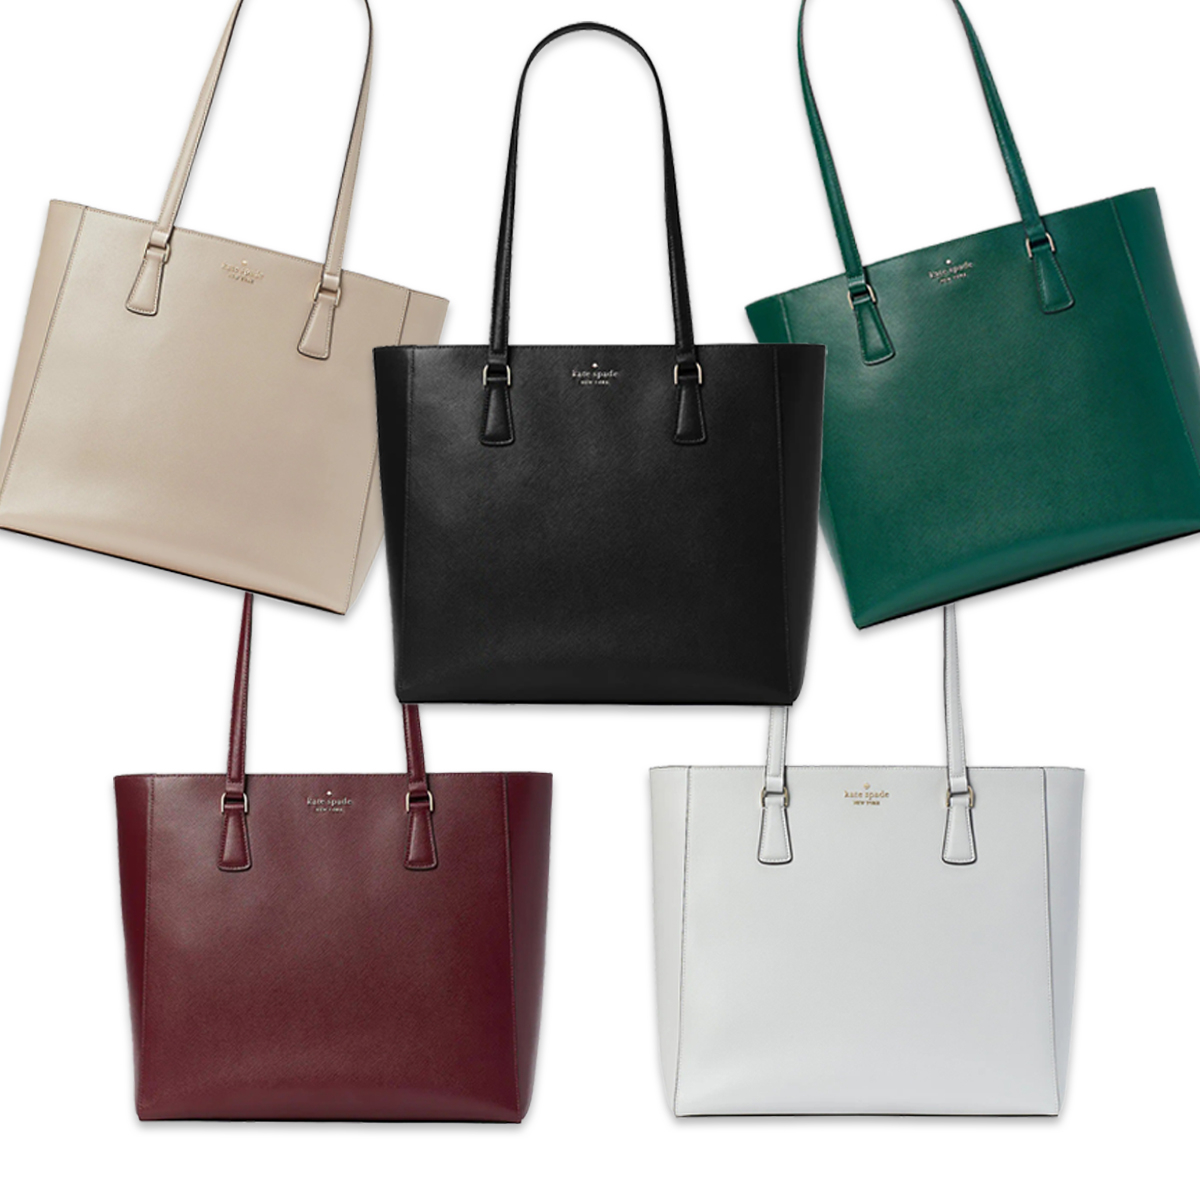 Kate Spade 24-Hour Flash Deal: Get This $460 Tote Bag for Just $99